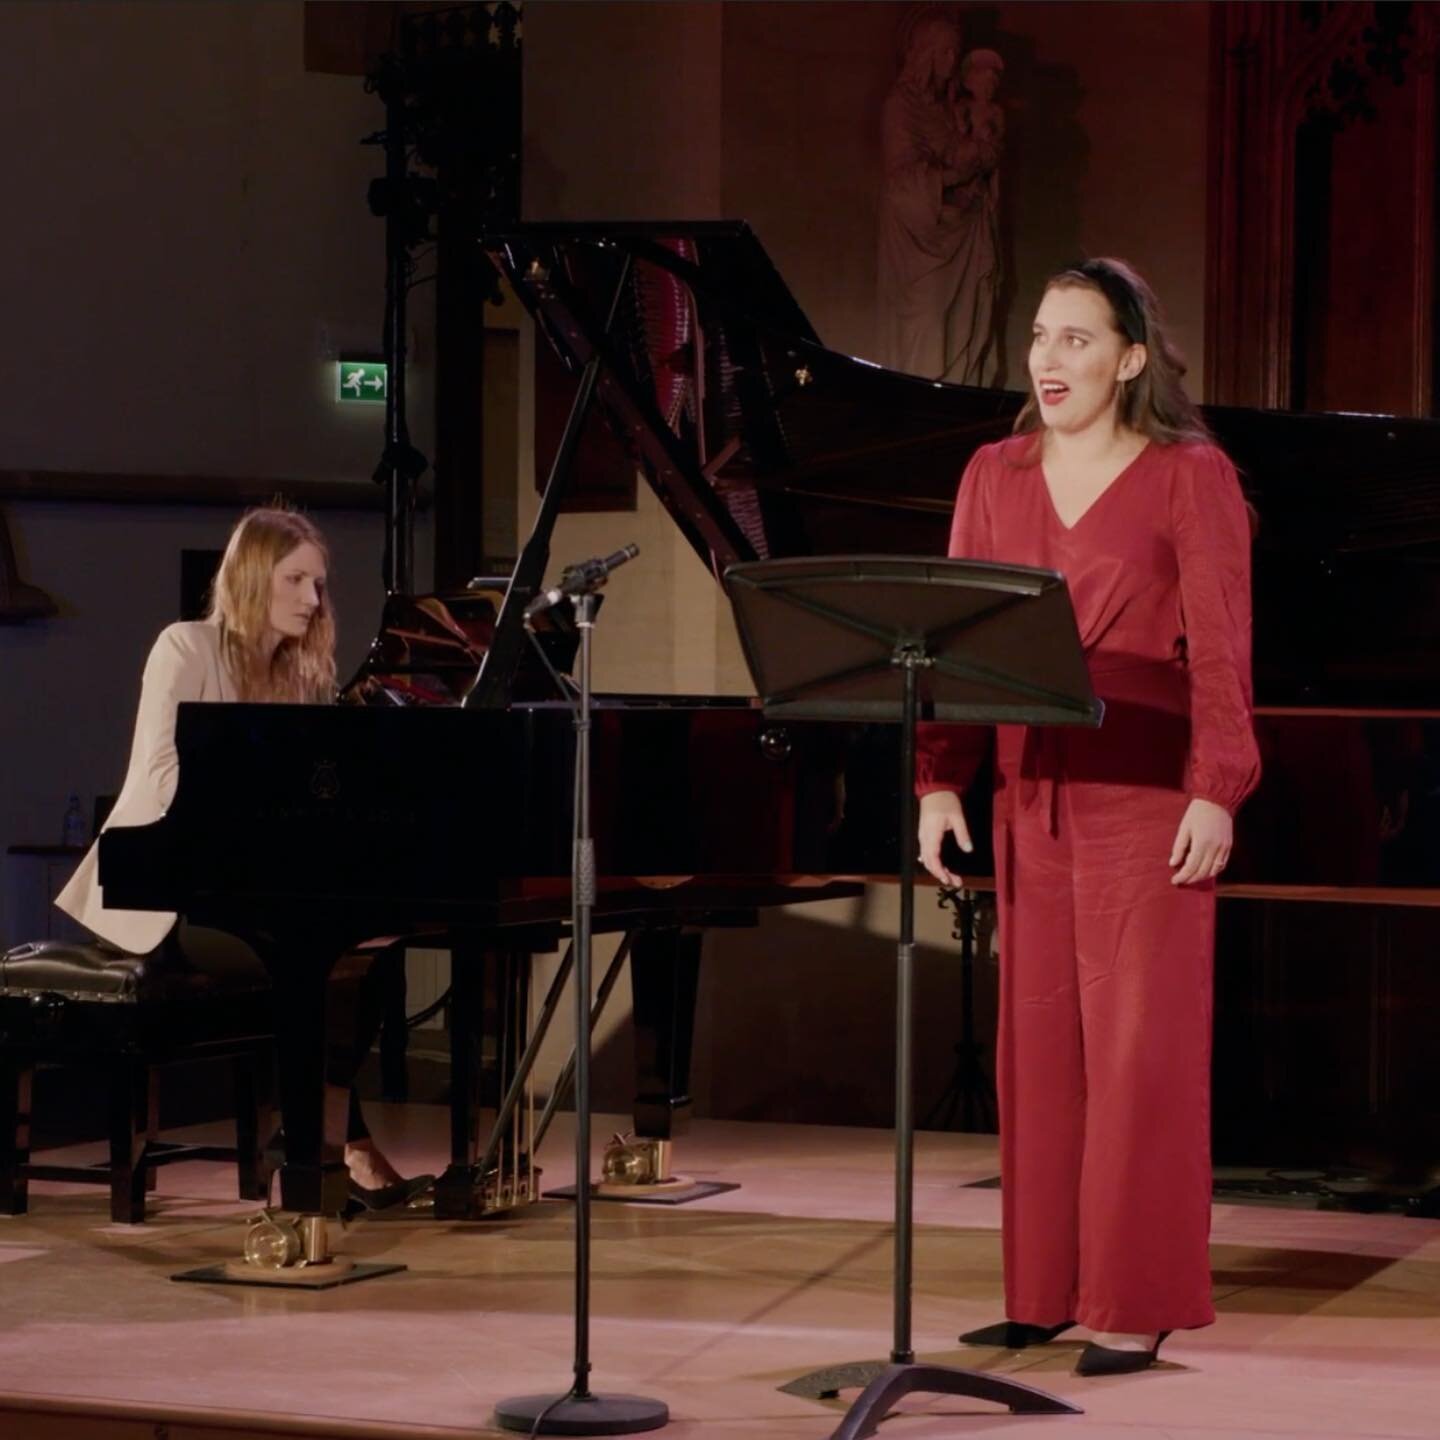 It&rsquo;s been two weeks since I made my debut at the @oxfordlieder festival as an Emerging Artist. I couldn&rsquo;t have asked for a better collaborative pianist in @lanabode as we performed Rhian Samuel&rsquo;s stunning Wildflower Songbook. It was